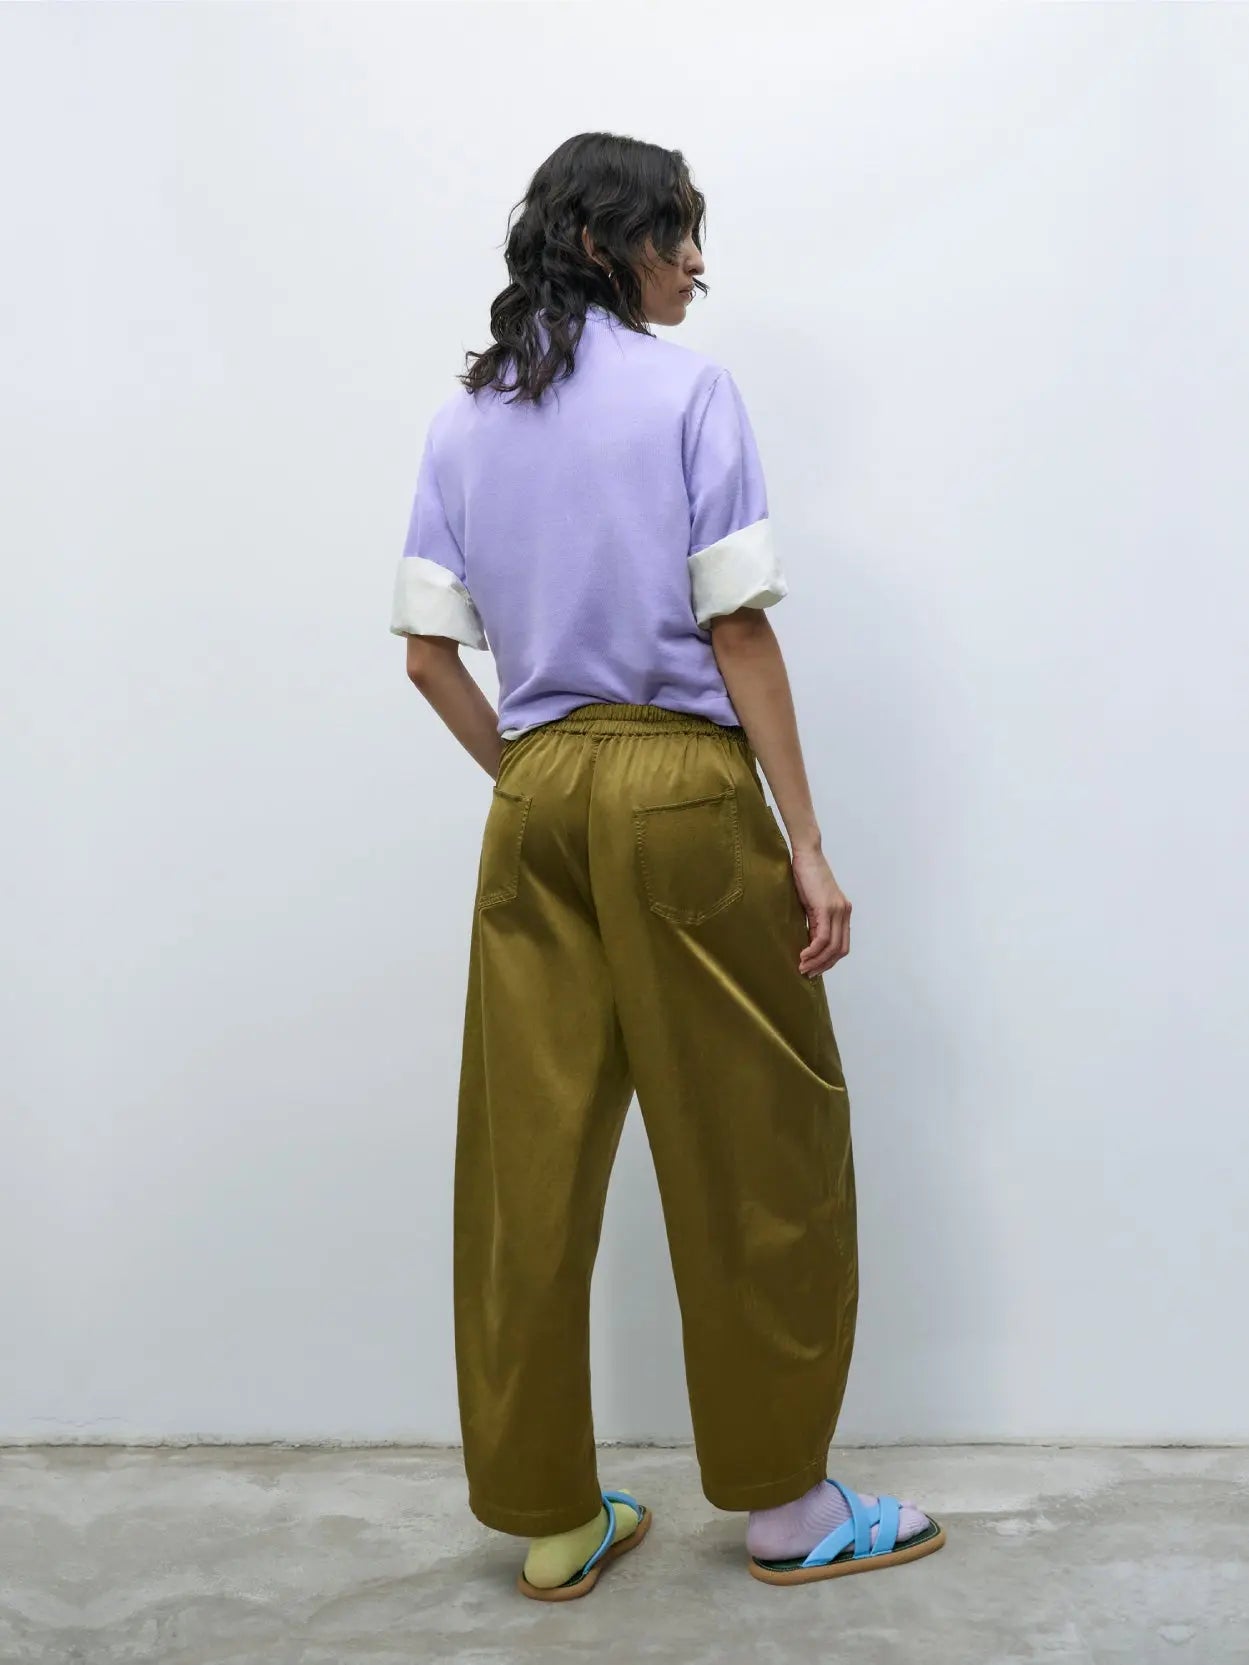 Satin Curved Pants Woodbine by Cordera with a relaxed fit and a slight taper at the cuffs. Featuring front pockets, a single-button closure, and a zipper fly. The fabric appears to be lightweight and slightly textured. Available exclusively at Bassalstore, your go-to shop in Barcelona for chic fashion finds.